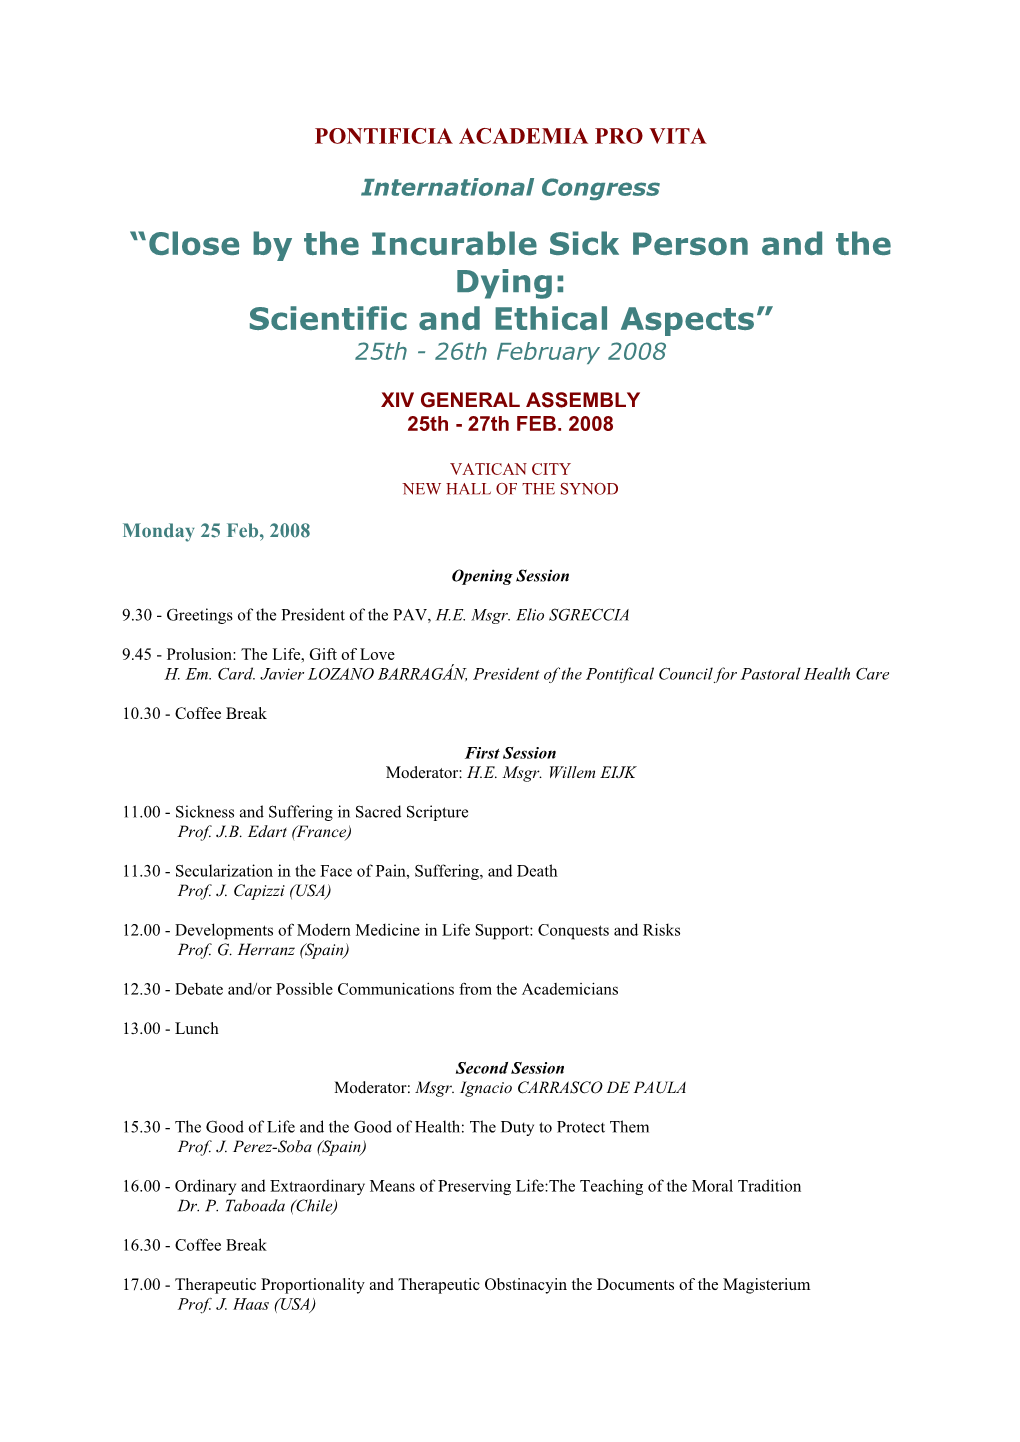 “Close by the Incurable Sick Person and the Dying: Scientific and Ethical Aspects” 25Th - 26Th February 2008